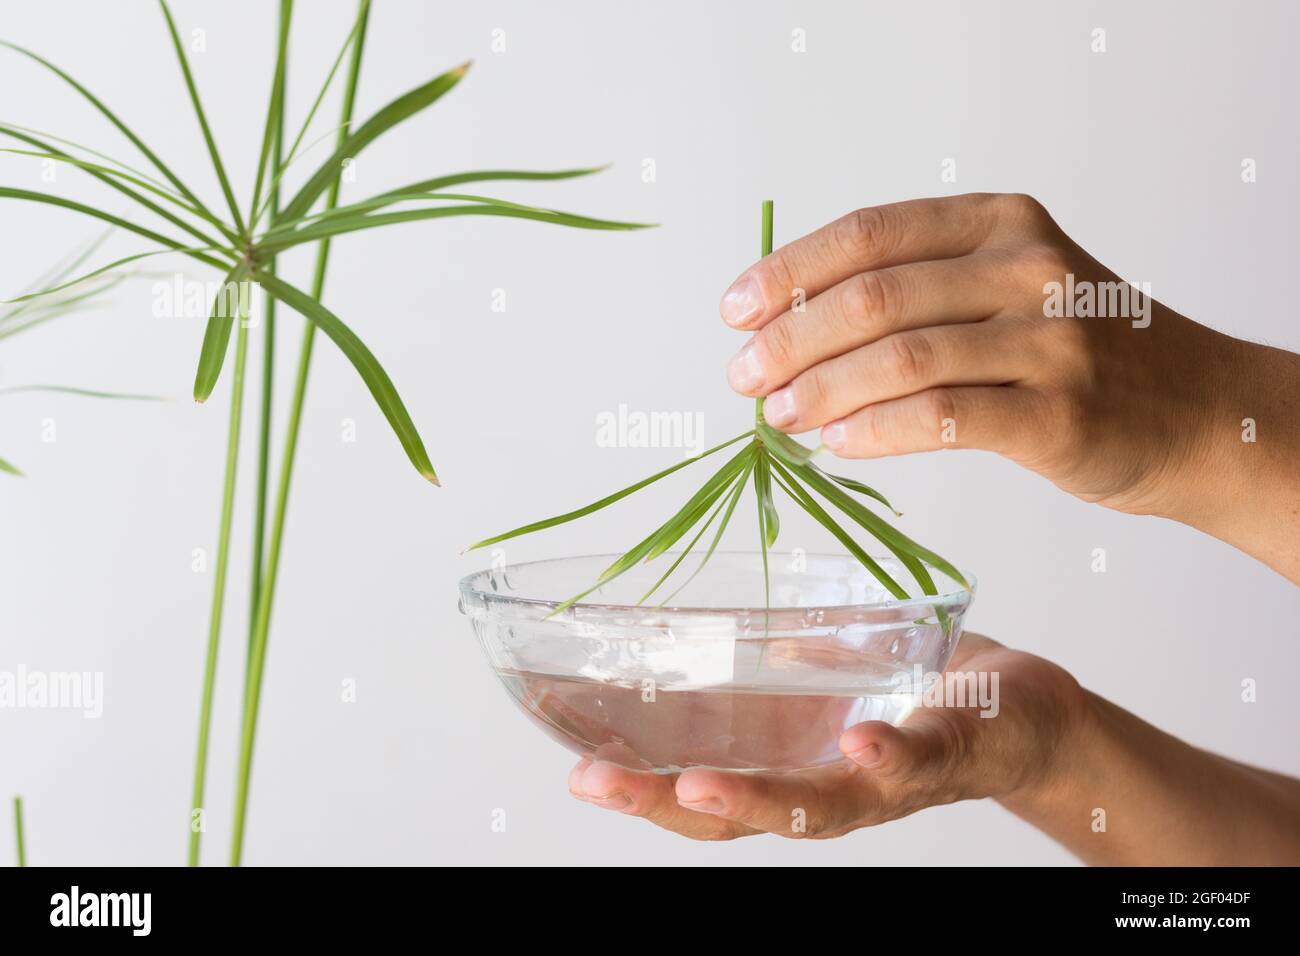 Woman hands holding glass bowl with water and cut umbrella of Cyperus plant for rooting on white background Stock Photo